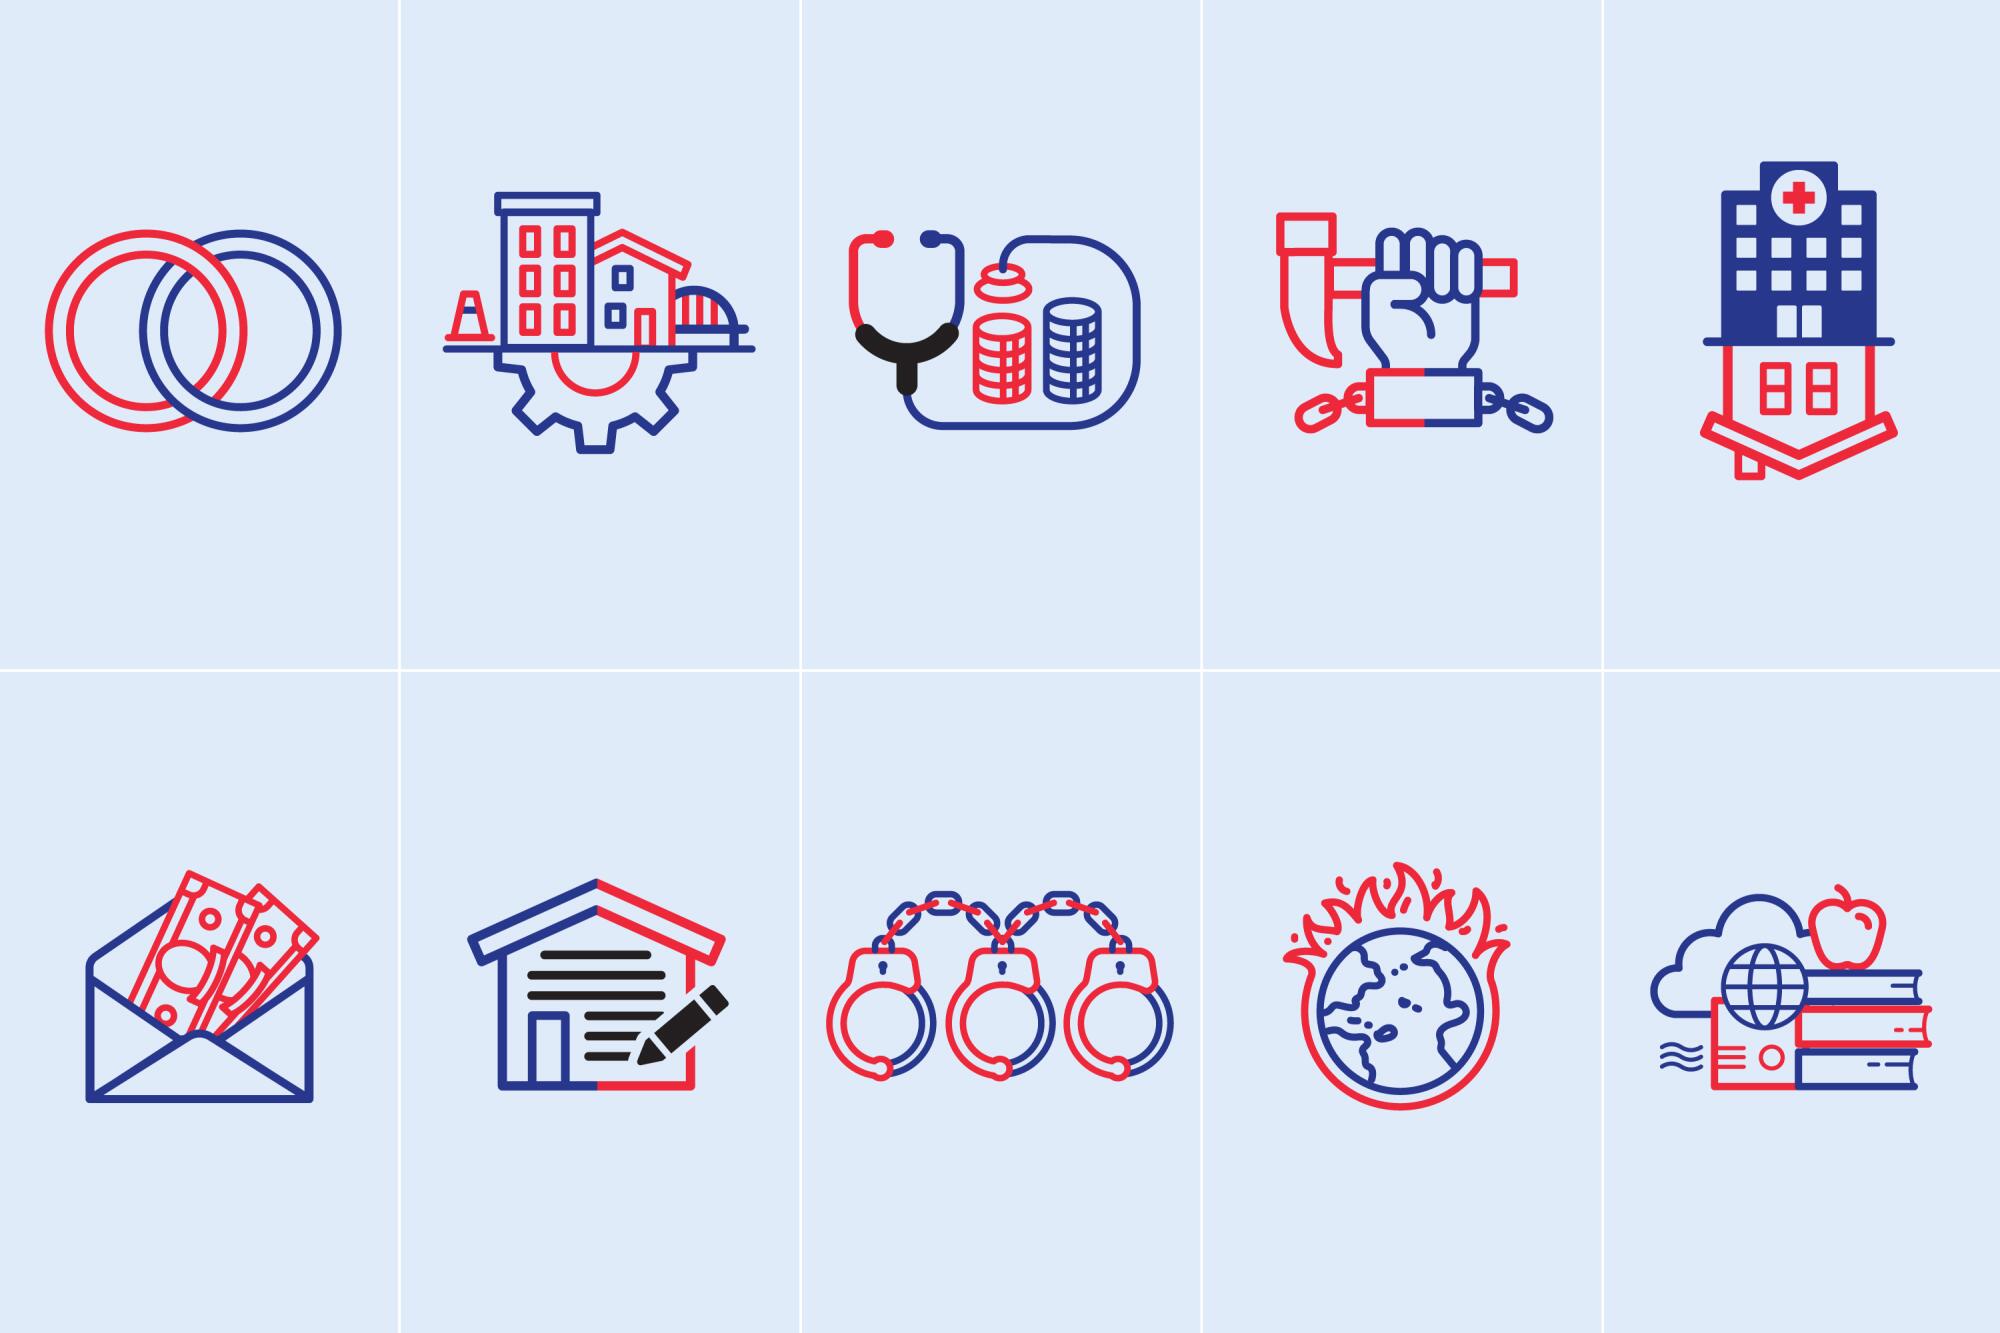 Ten ballot proposition logos in red, white and blue in a grid 